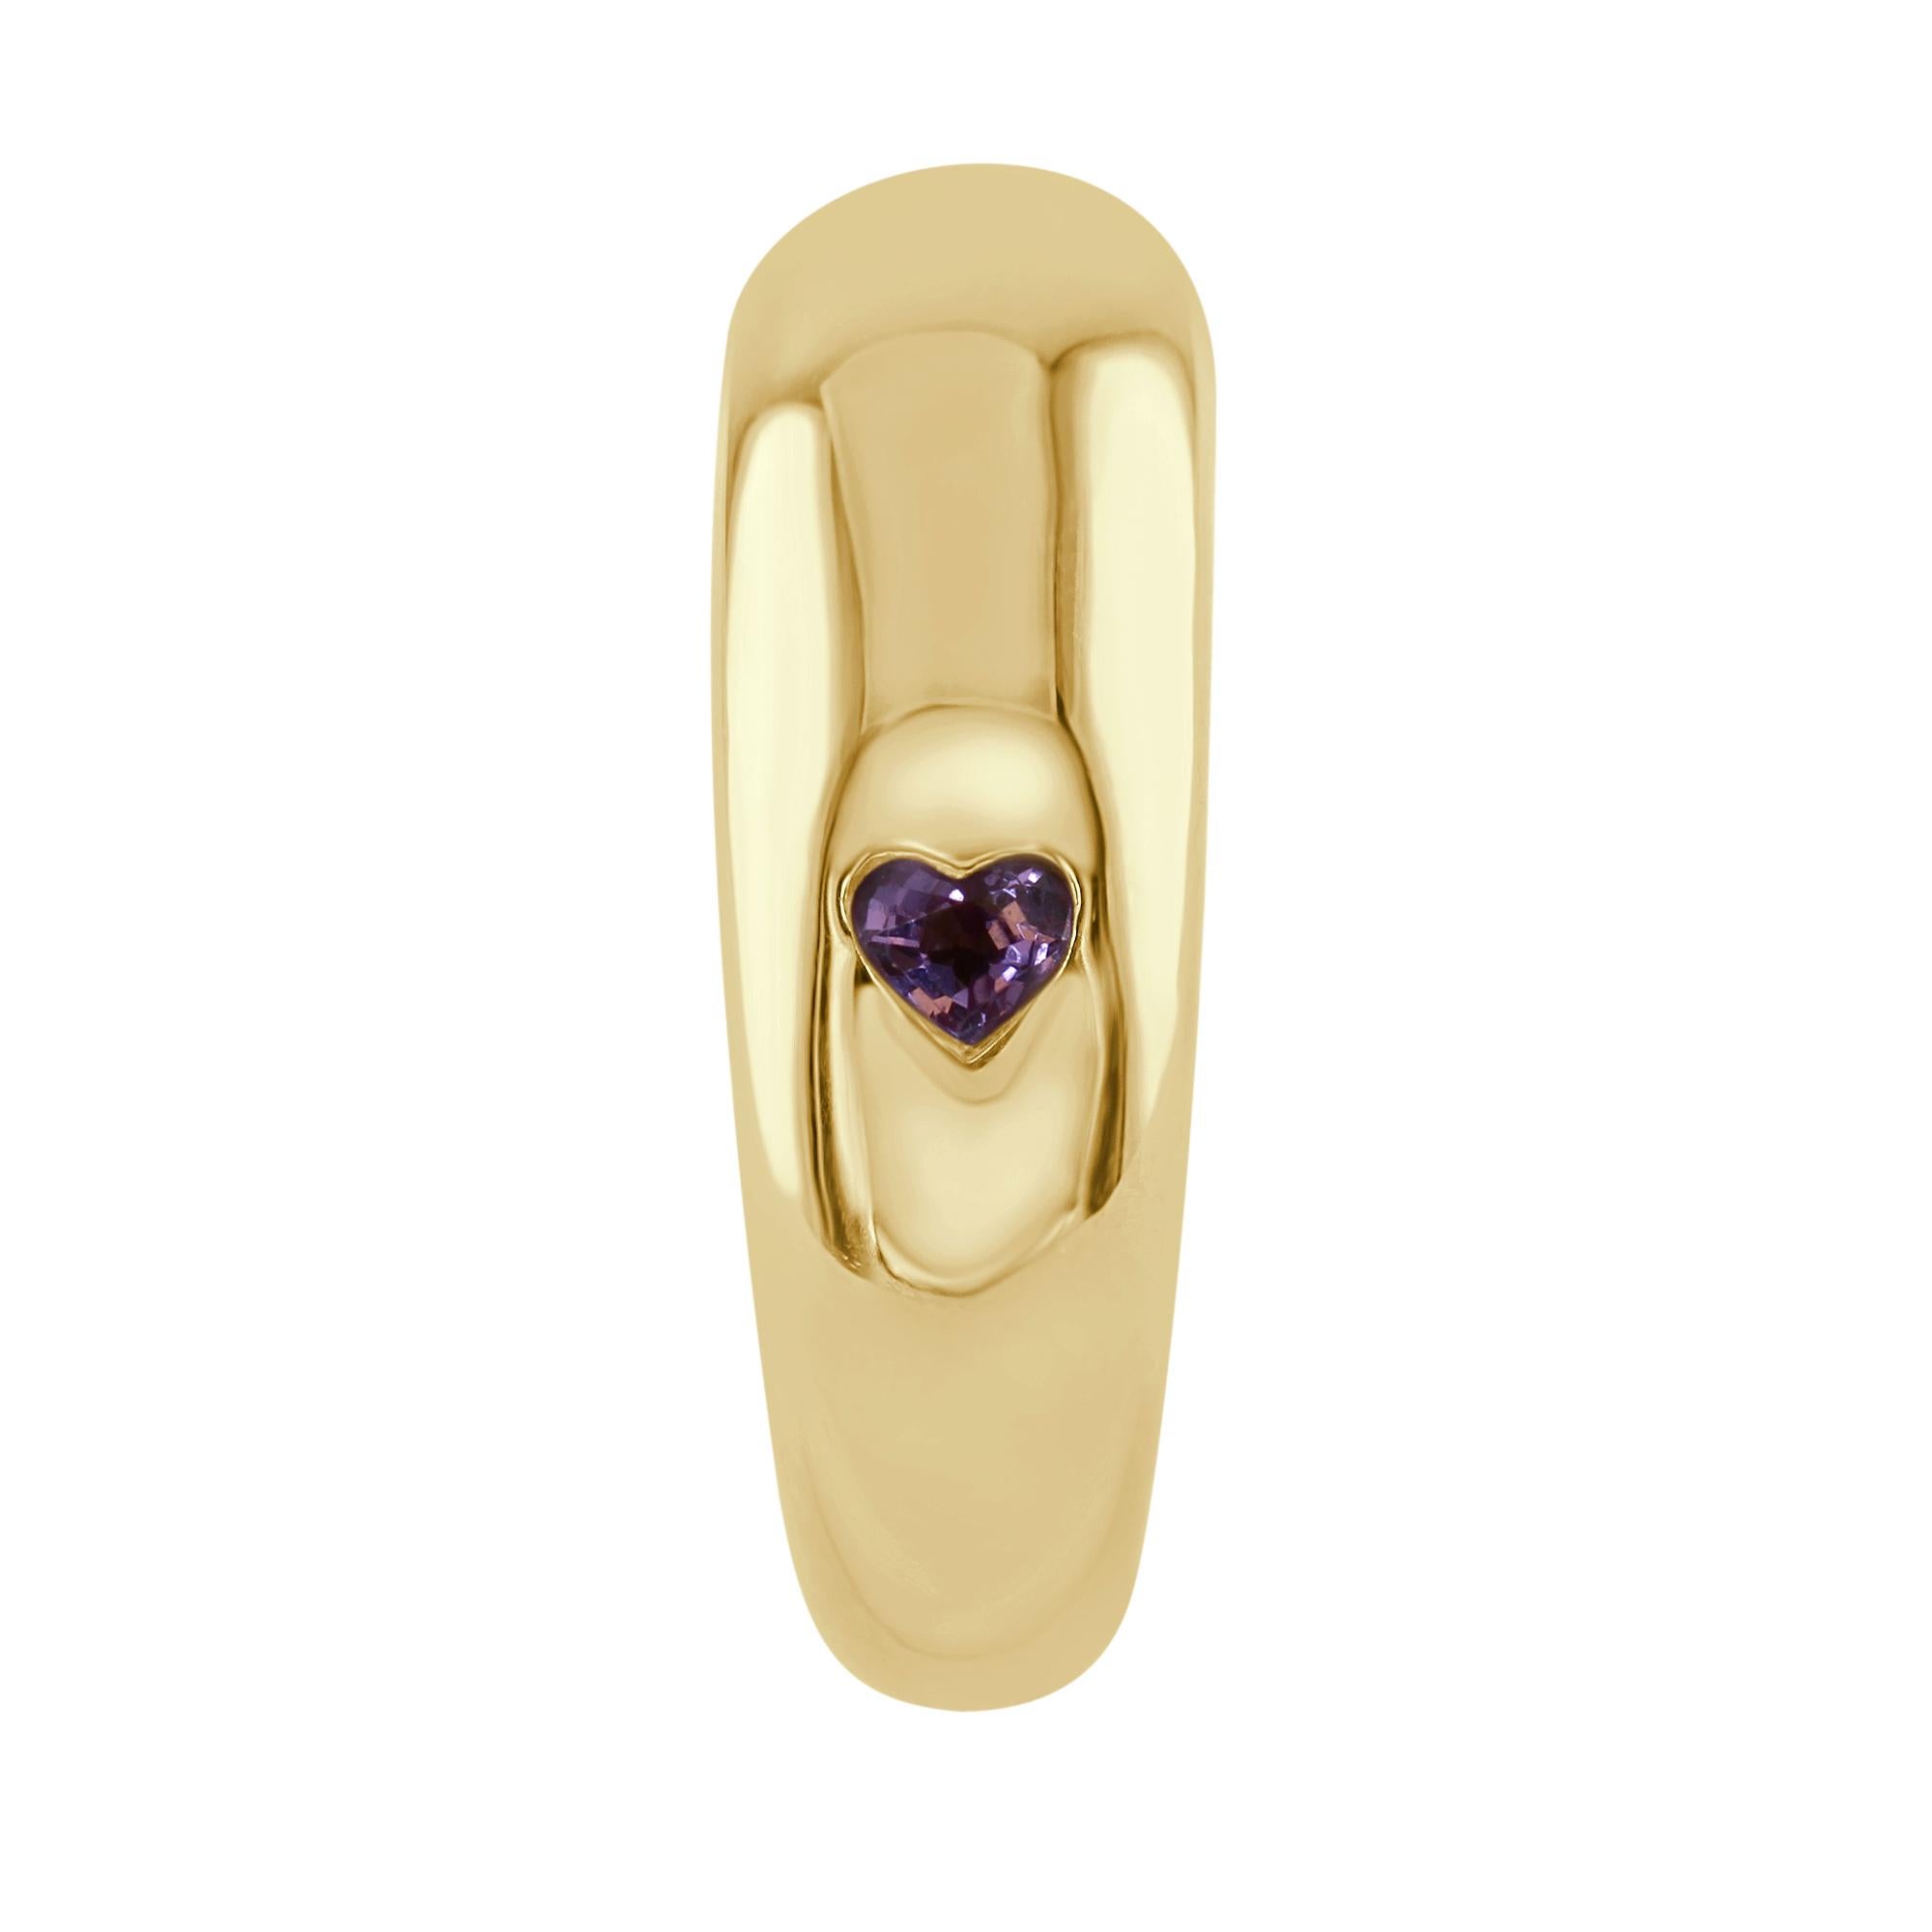 This gorgeous Chaumet gold ring is accompanied by a heart-shaped Pink Sapphire, for extra sparkle.

Set in 18K.

Signed: Chaumet Paris 498080-750

This ring is a beautiful accessory fit for any occasion, and may be worn as a right-hand ring. 
Finger